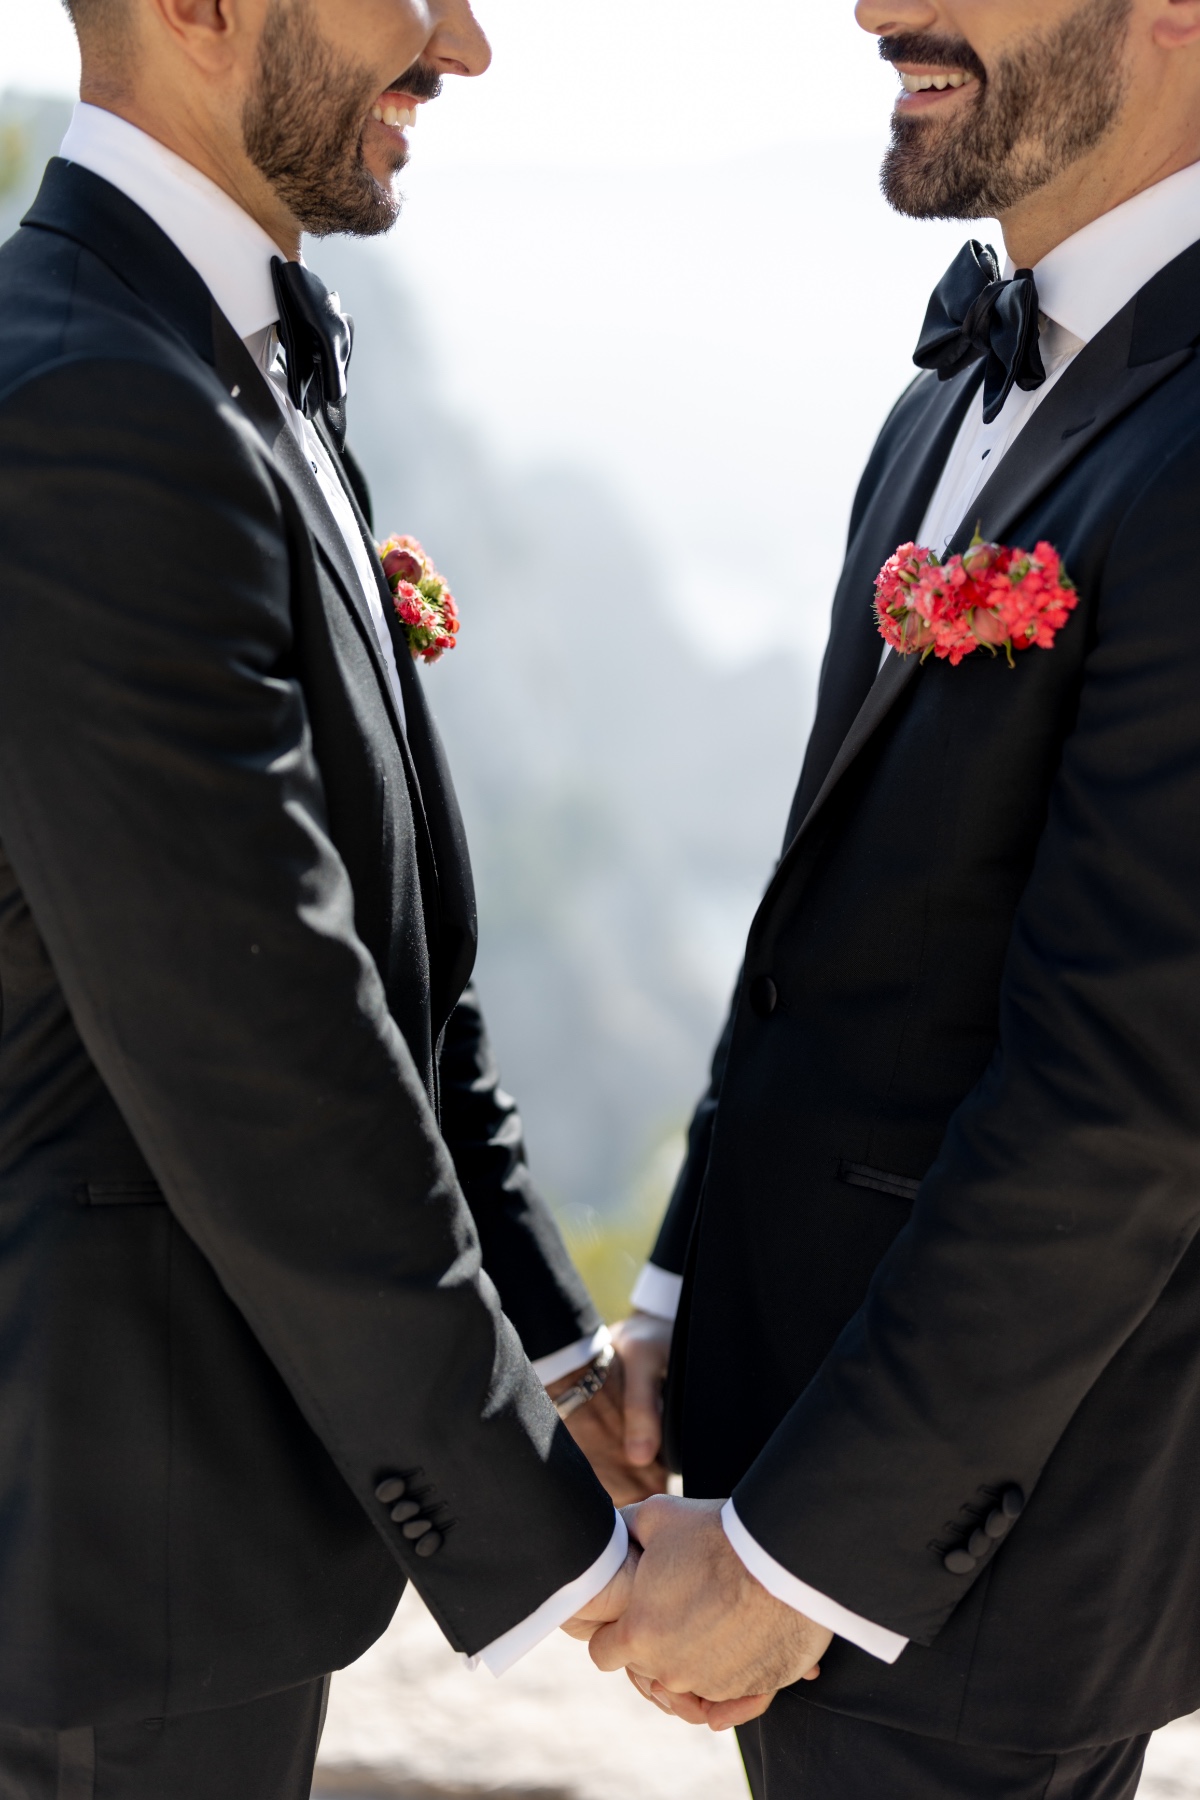 Matching coral colorful wedding boutonnieres for two grooms 